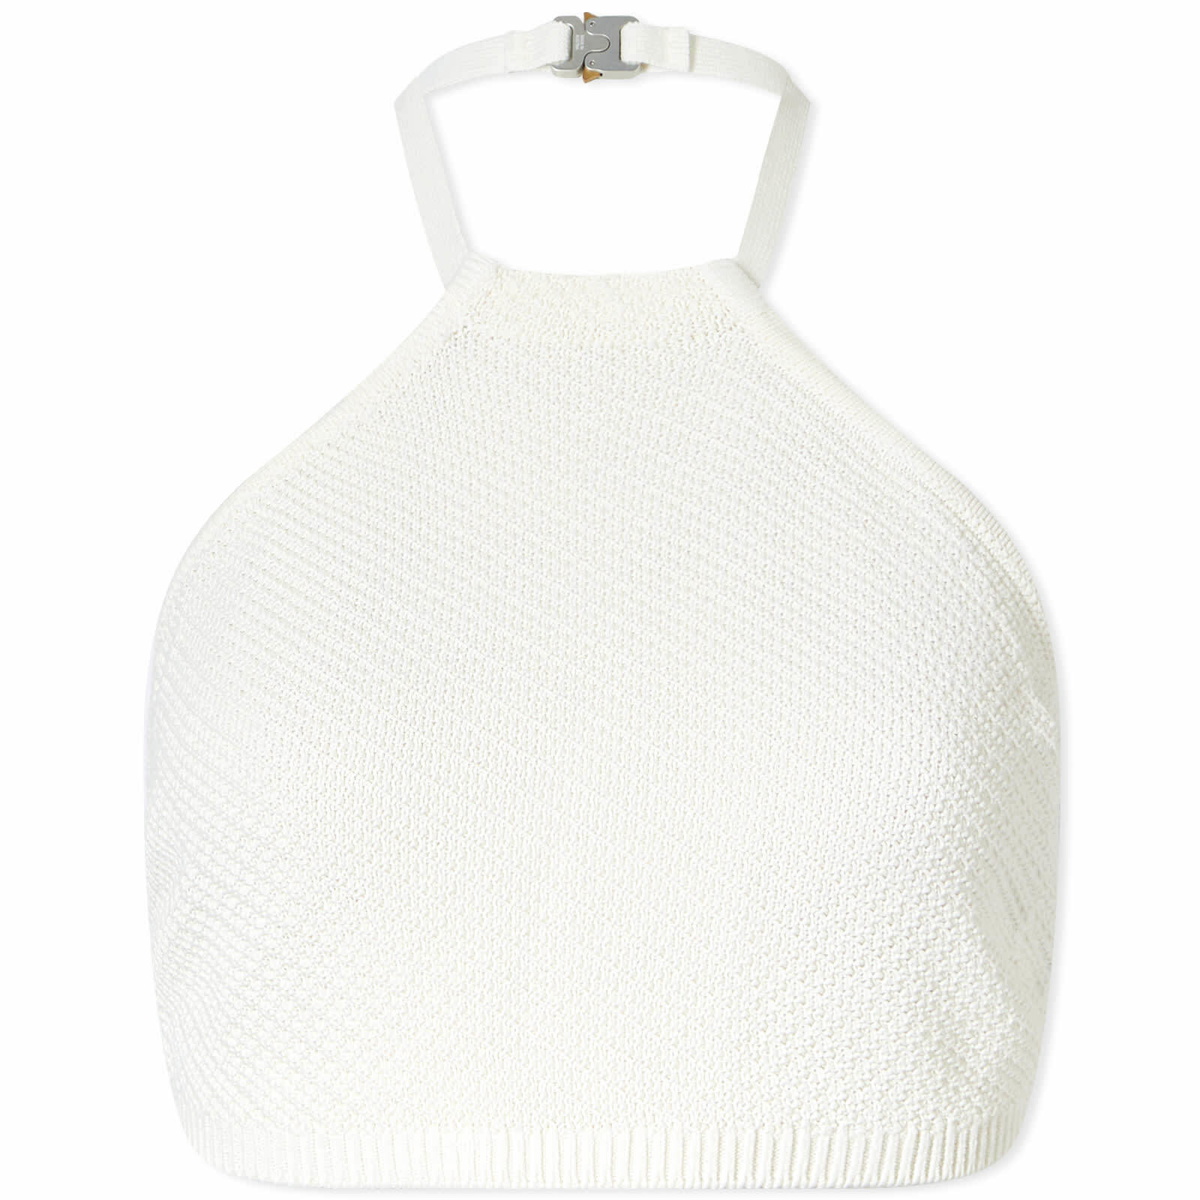 Photo: 1017 ALYX 9SM Women's Buckle Cropped Halter Top in White